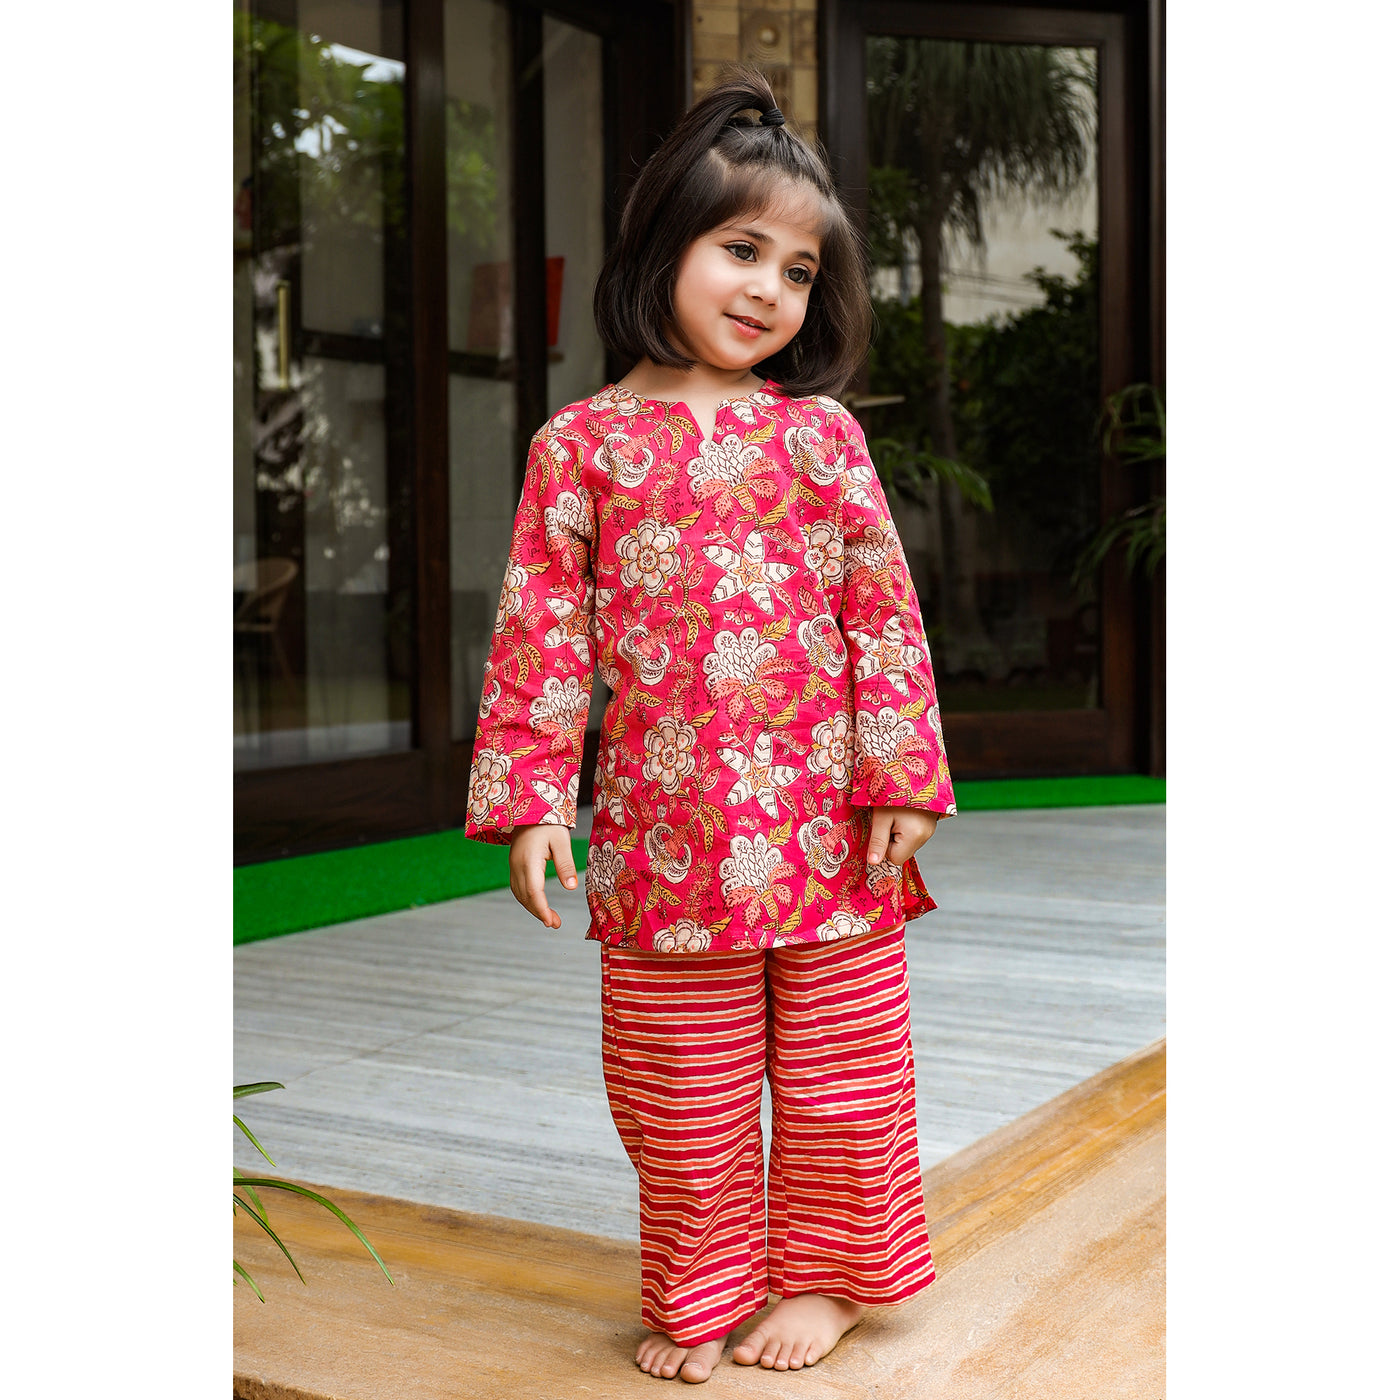 Floral Mosaic with Stripes on Kids Loungewear Set